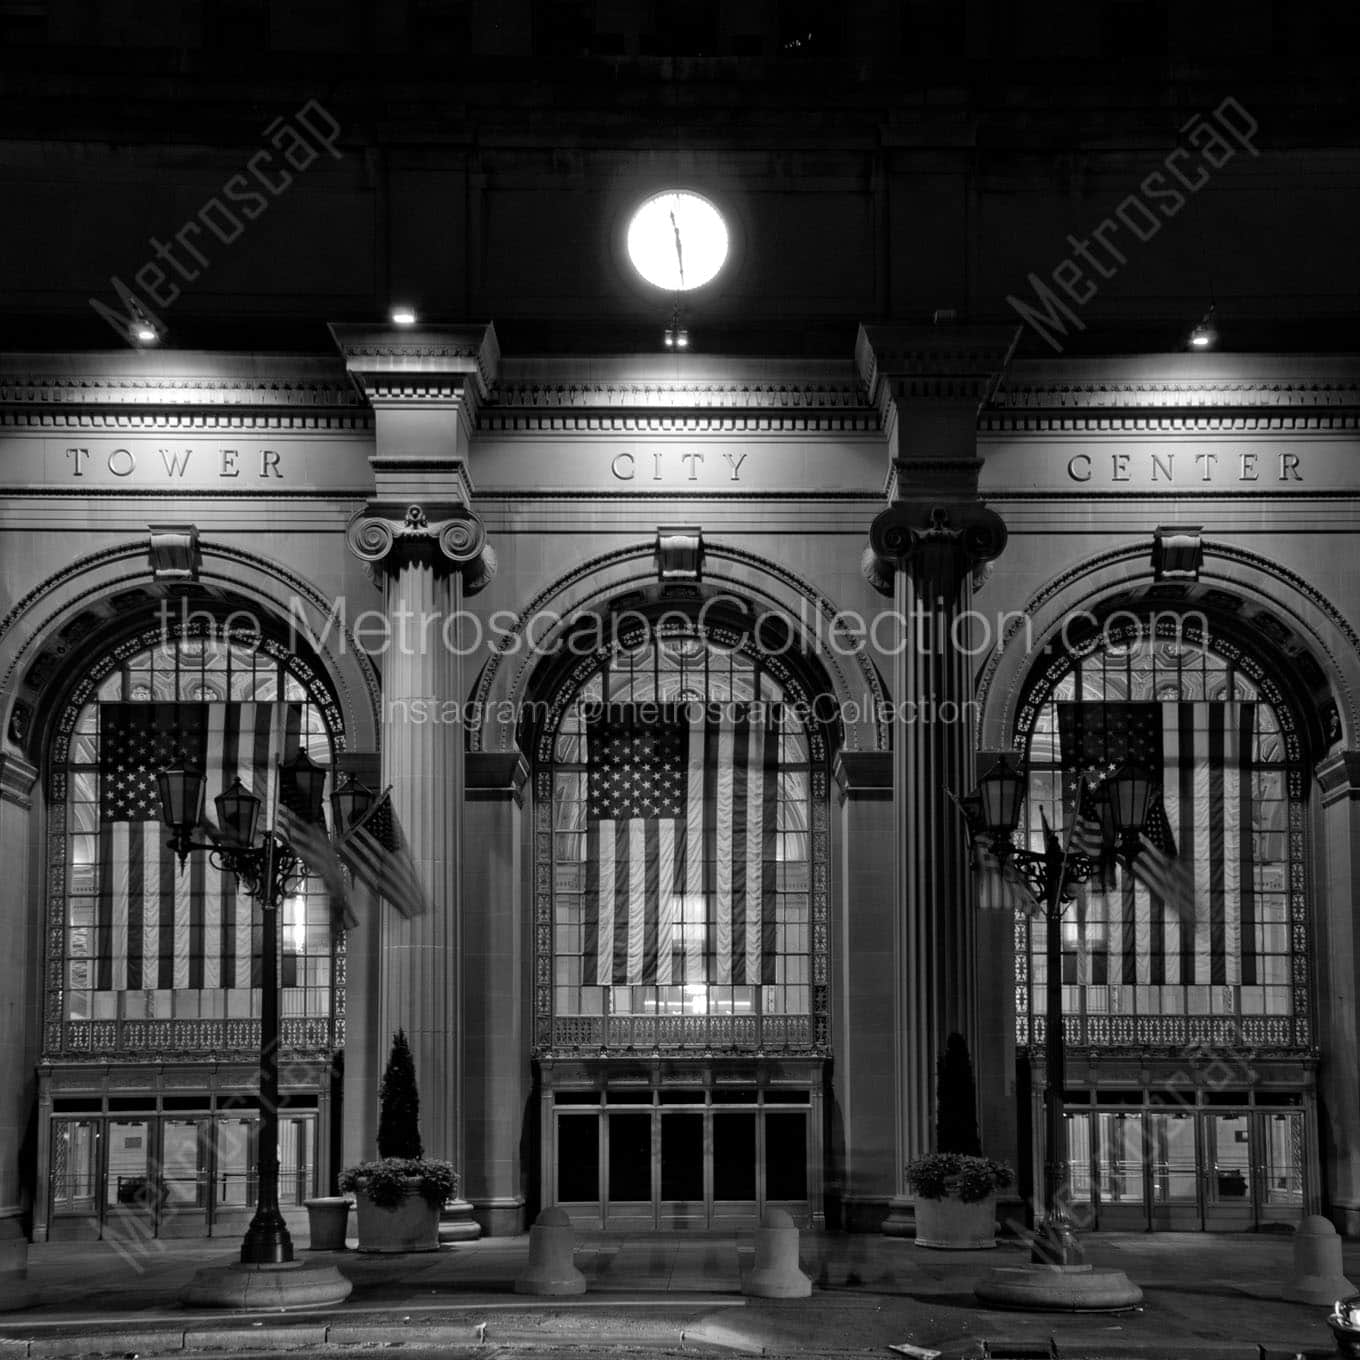 tower city center public square at night Black & White Wall Art